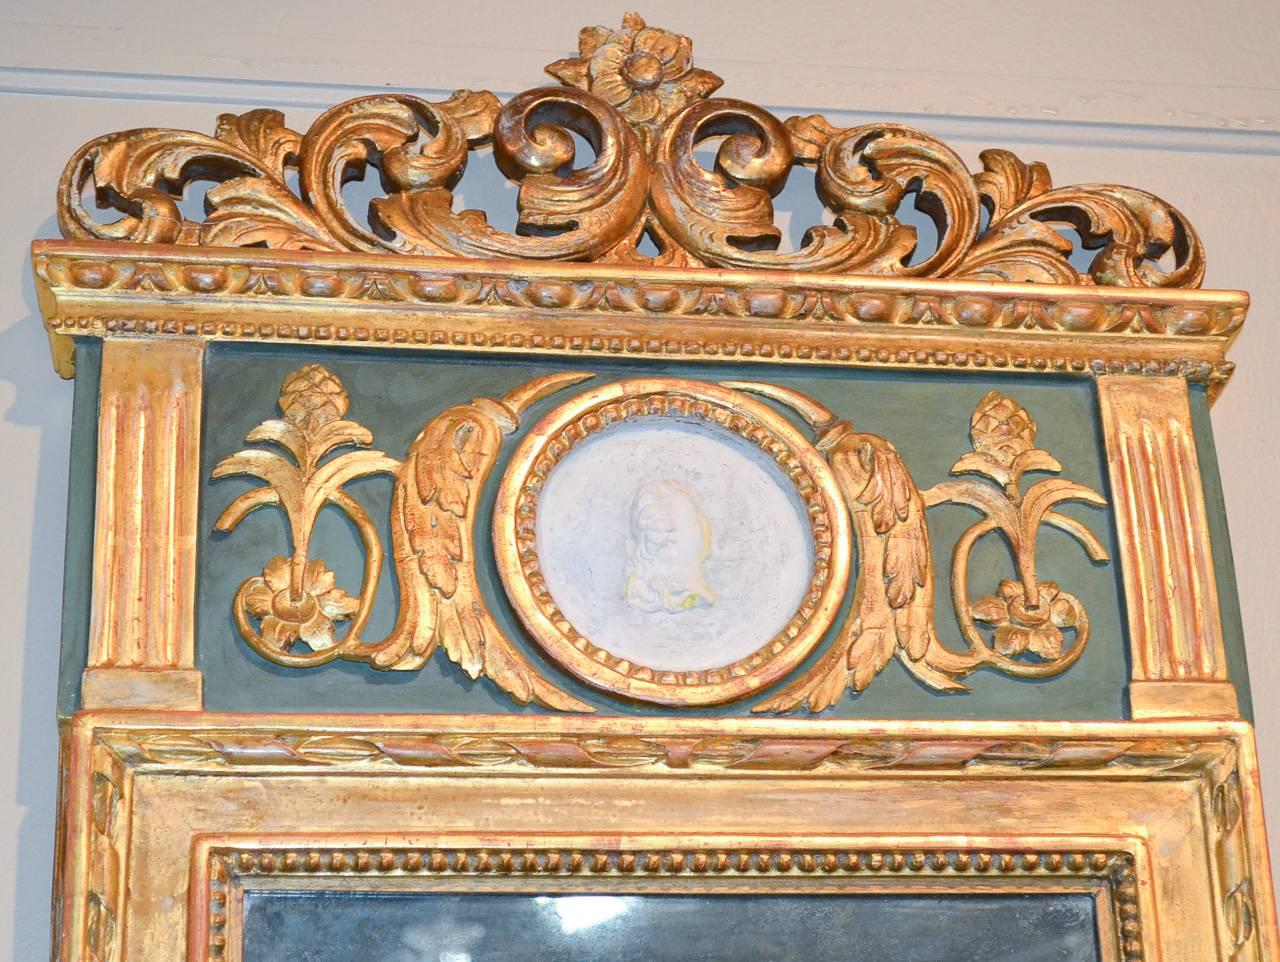 Marvelous 19th century Swedish hand-carved and parcel-gilt mirror circa 1850. Having hand-carved cartouche and frame in acanthus leaf motif, bisque portrait plaque of lady, painted an parcel-gilt beaded frame and with original mirrored glass.